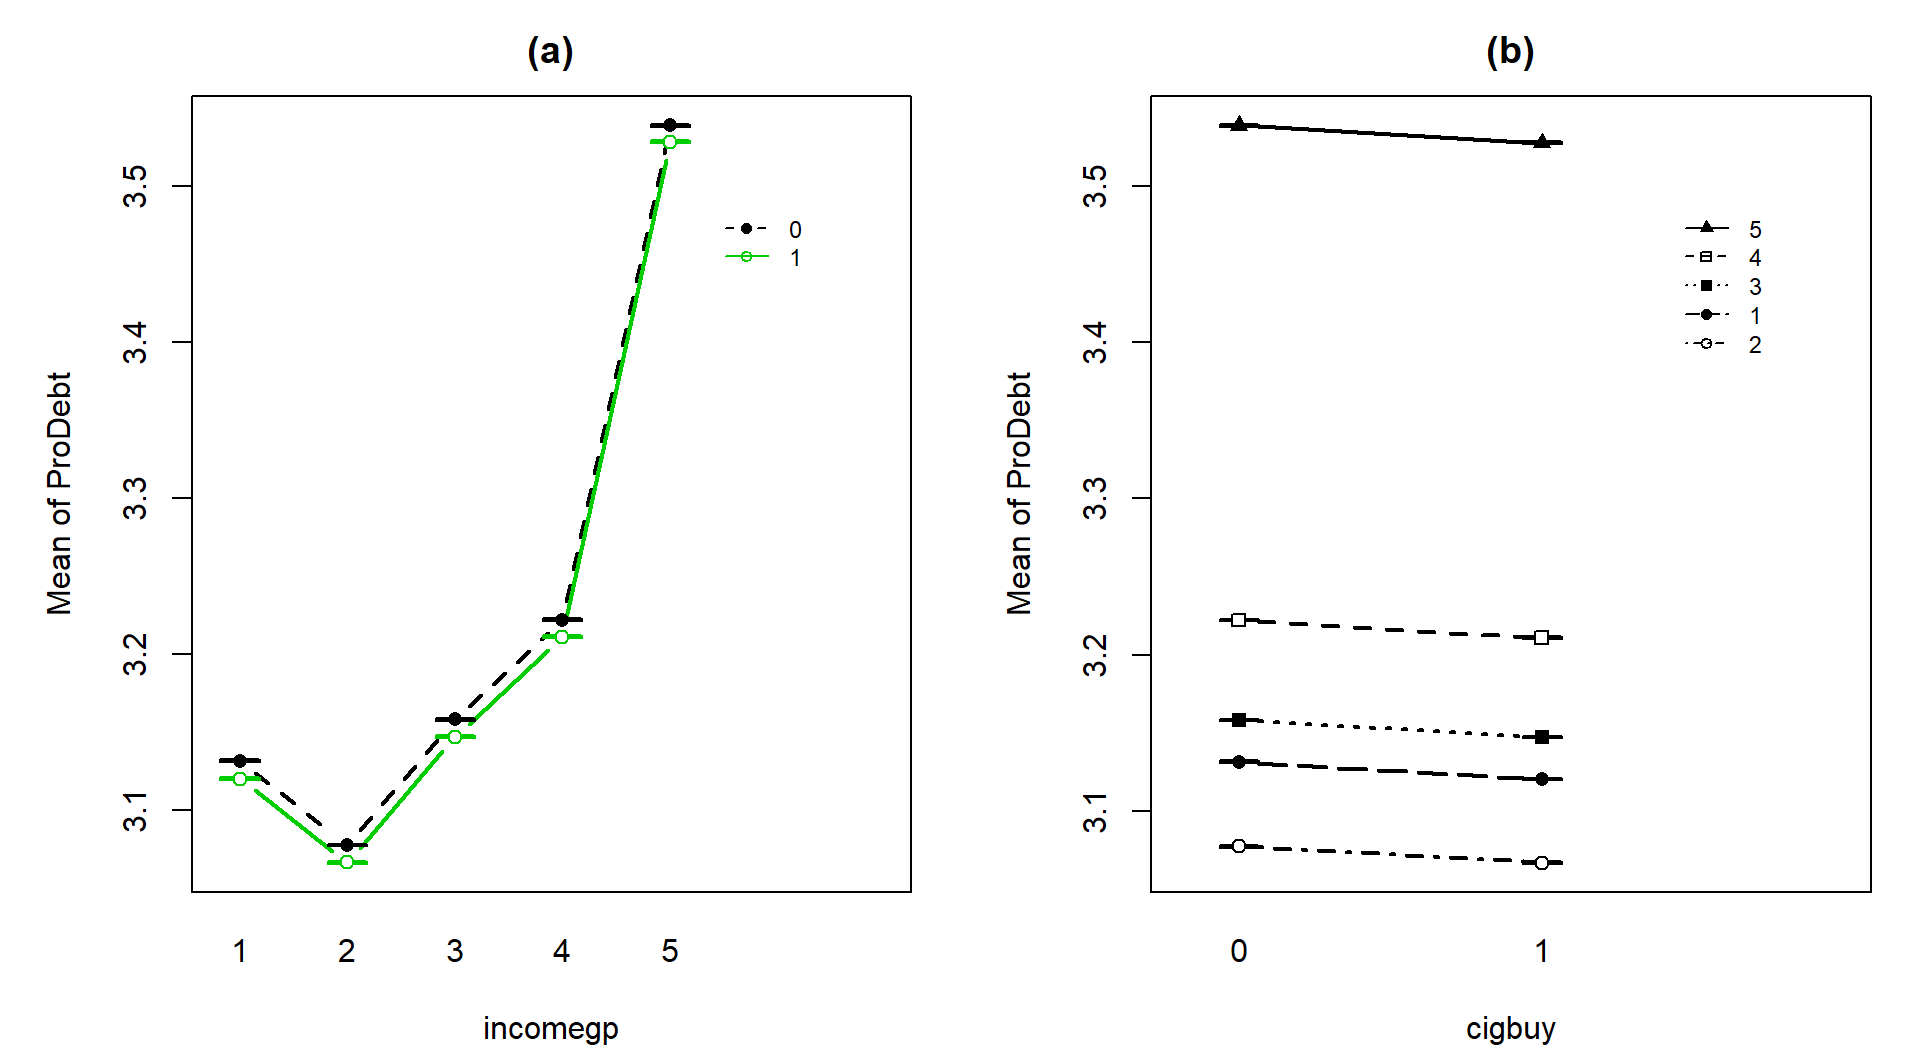 Illustration of the results from Table 4.2 showing the combined impacts of the components of the additive model for prodebt. Panel (a) uses income groups on the x-axis and different lines for cigarette buyers (1) or not (0). Panel (b) displays the different income groups as lines with the cigarette buying status on the x-axis.